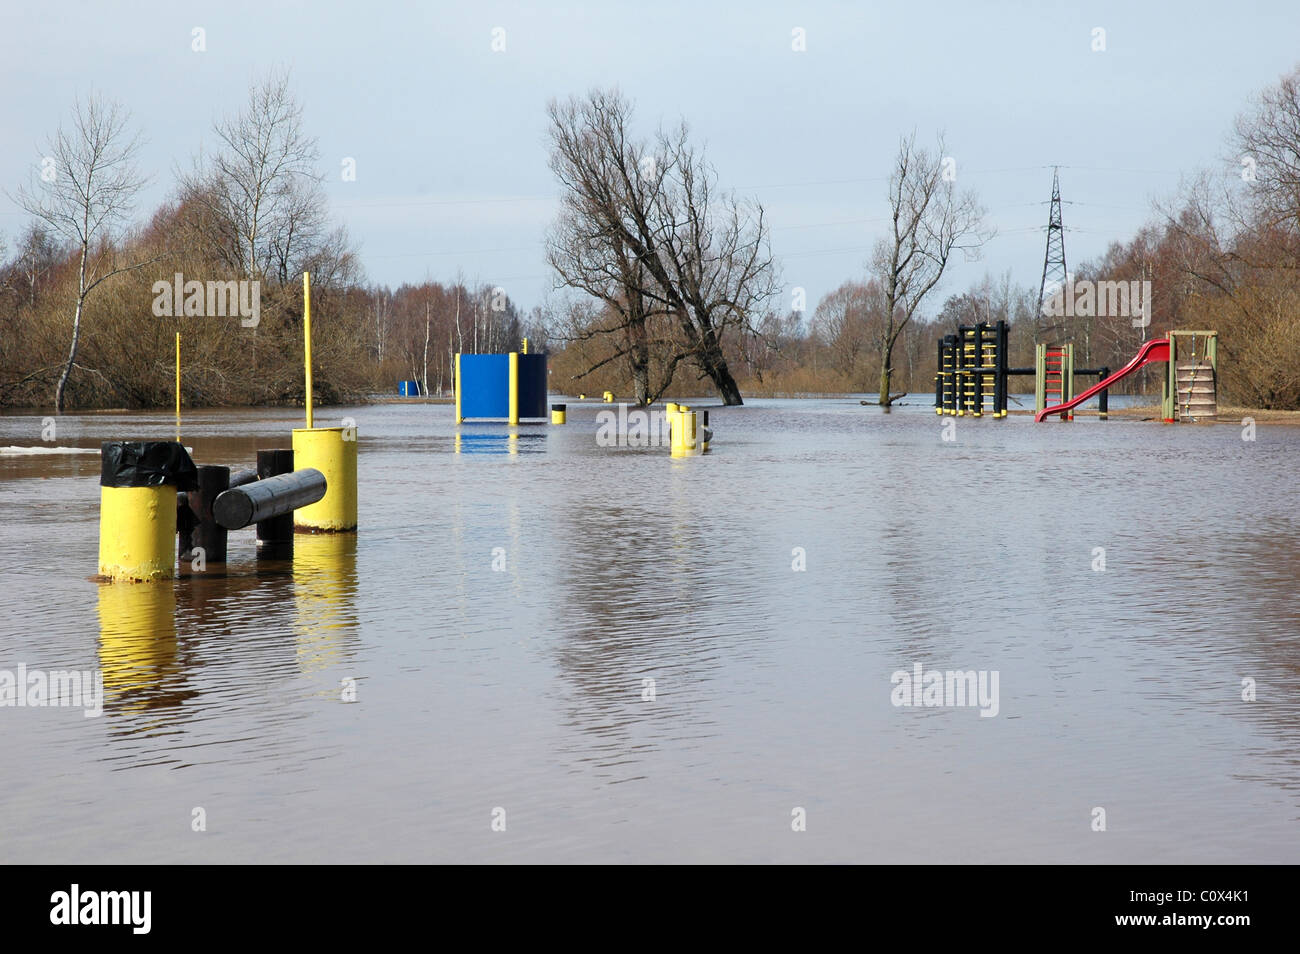 flood surrounds playground at spring Stock Photo